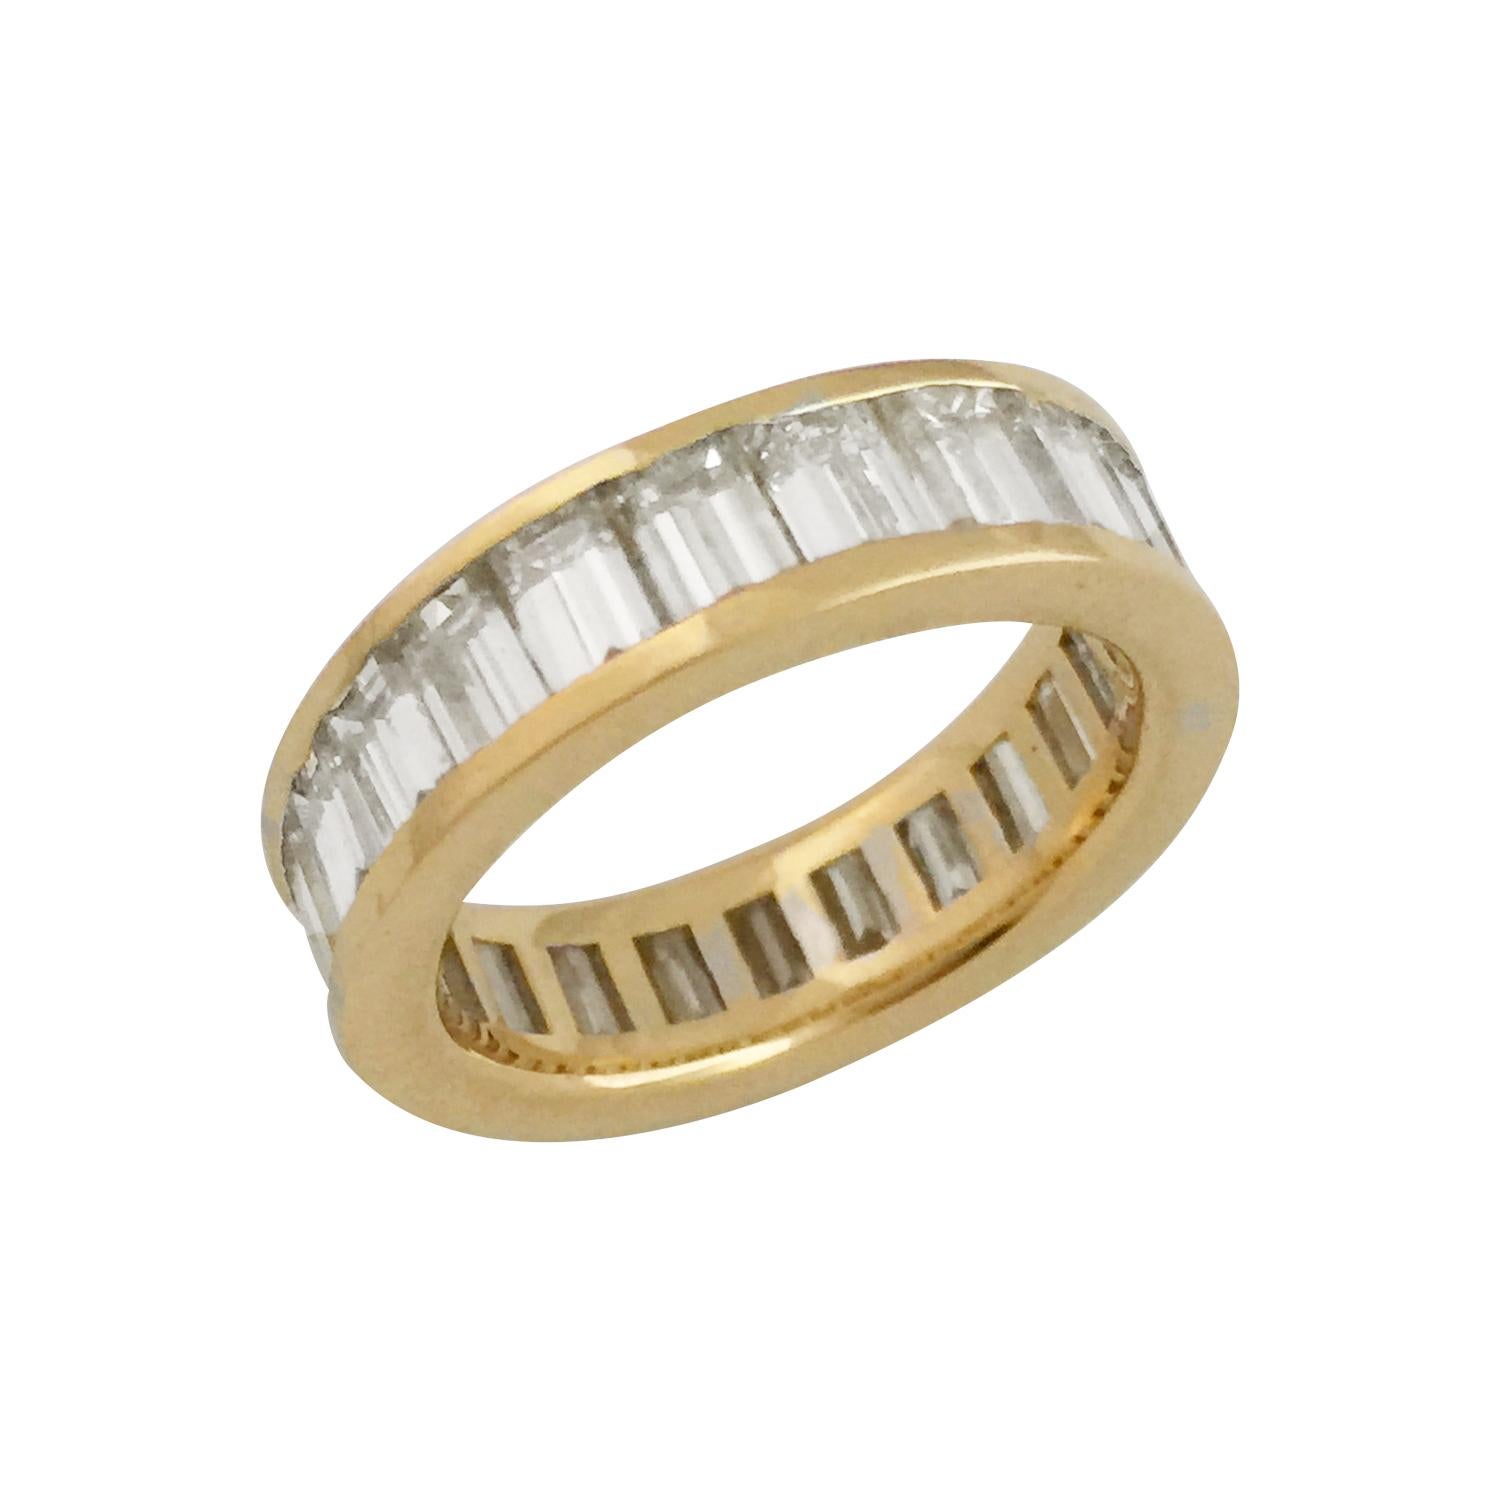 Yellow gold 750/000 baguette-cut diamond wedding ring.
22 baguette-cut diamonds.
Dimensions : 5 mm x 3 mm, about 6 carats total.
Quality : G/H - VS
Three stones are slightly chipped 
Ring size : 7
